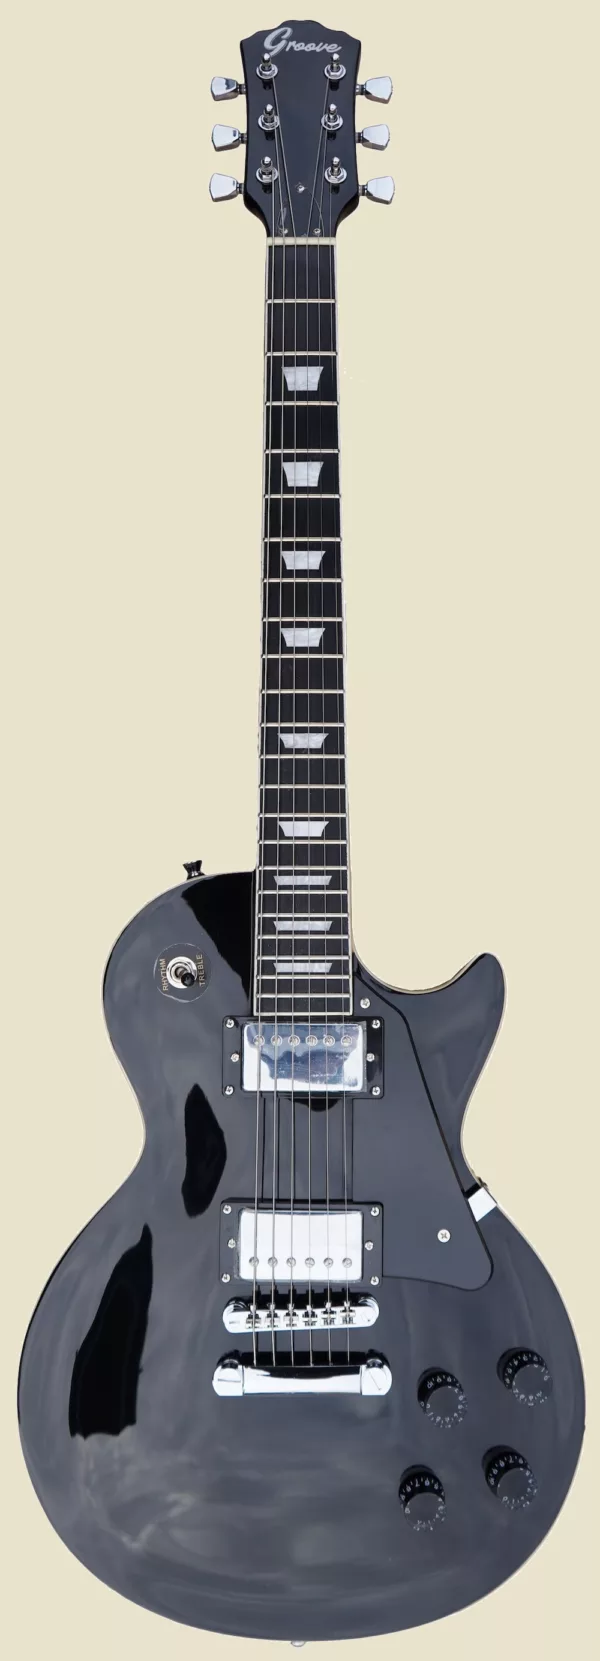 A GROOVE LESPAUL SHAPED ELECTRIC GUITAR SET-NECK COLOR ALL BLACK (CONTROLS AND PICKGUARDS)